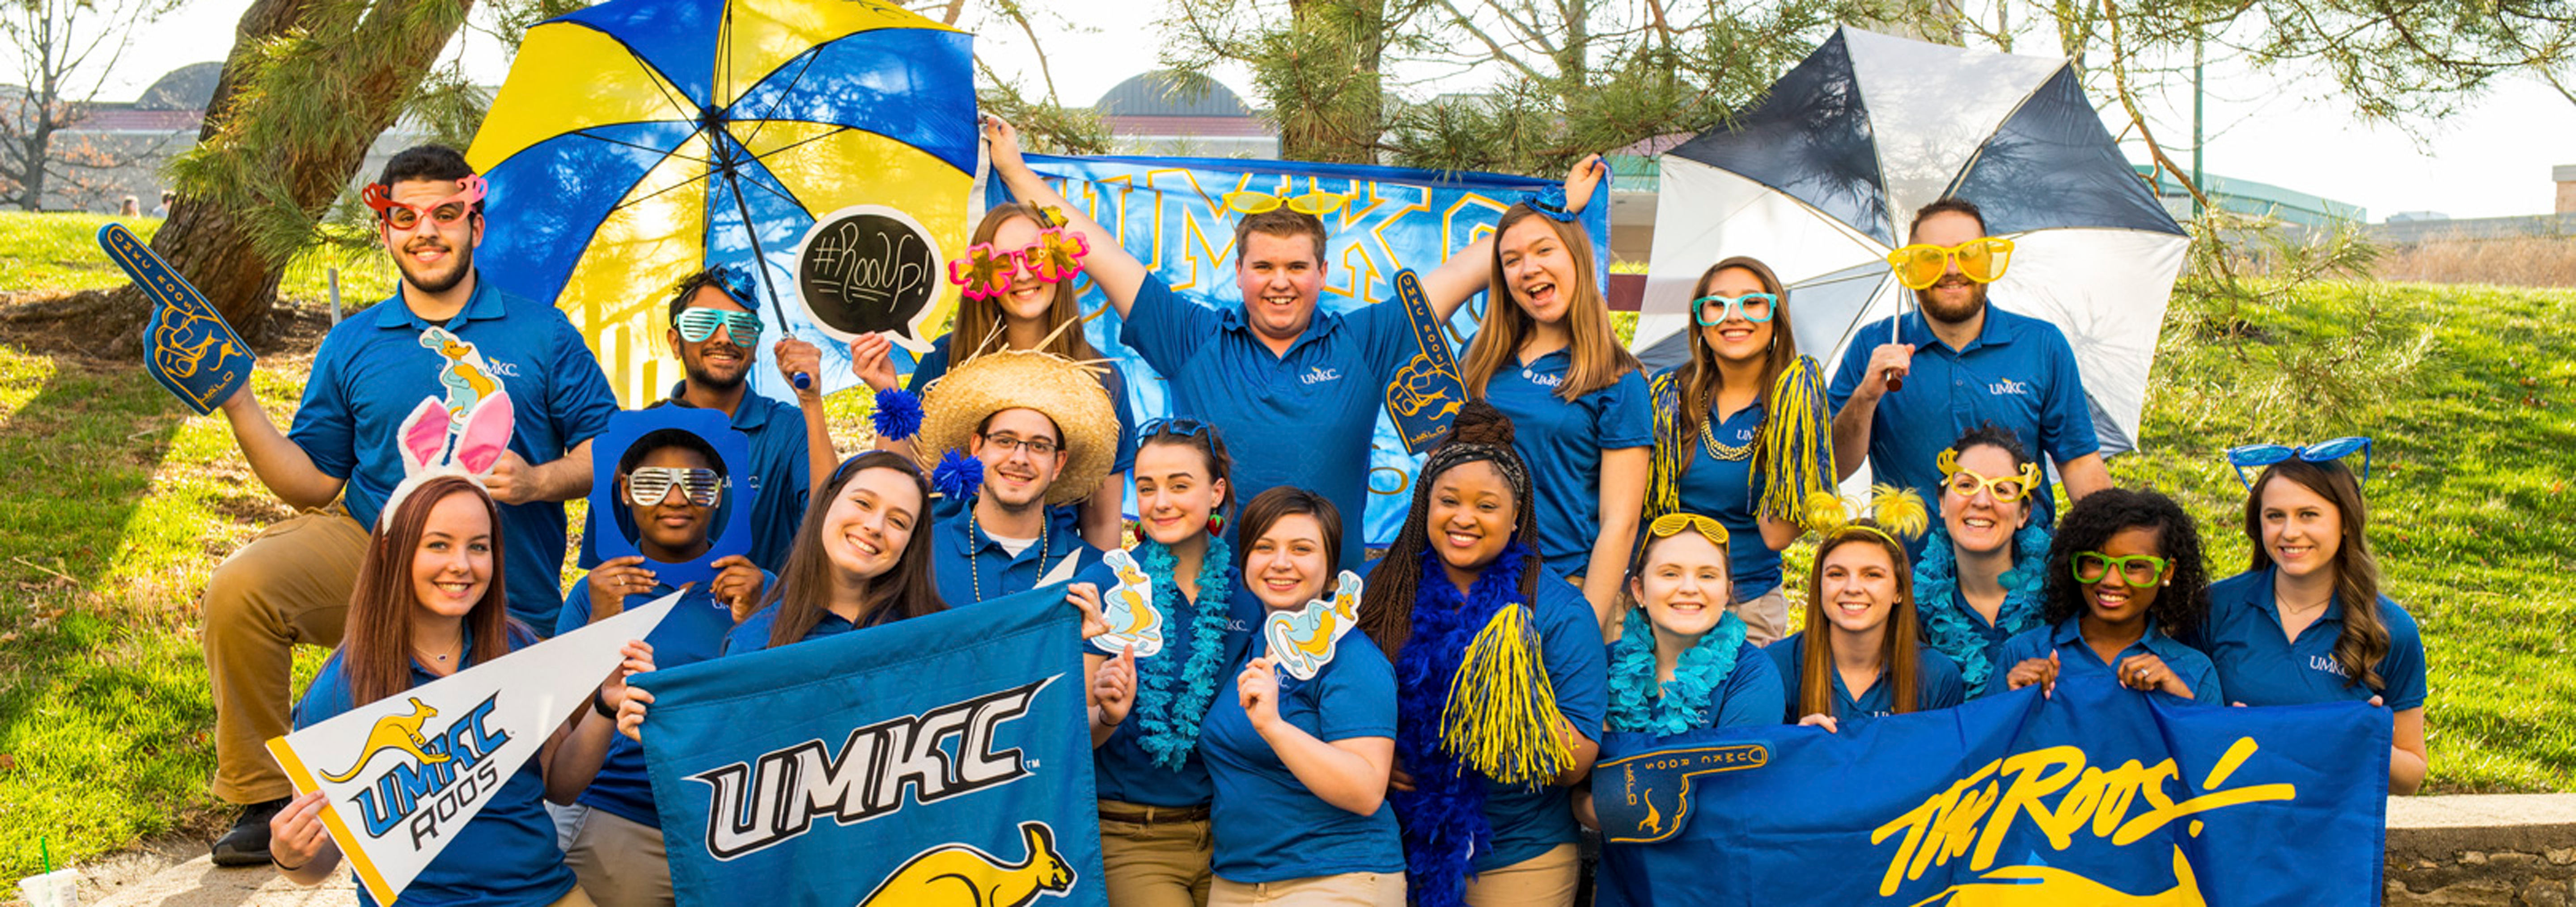 large group of diverse students with hats, big sunglasses and UMKC gear pose with UKMC flags